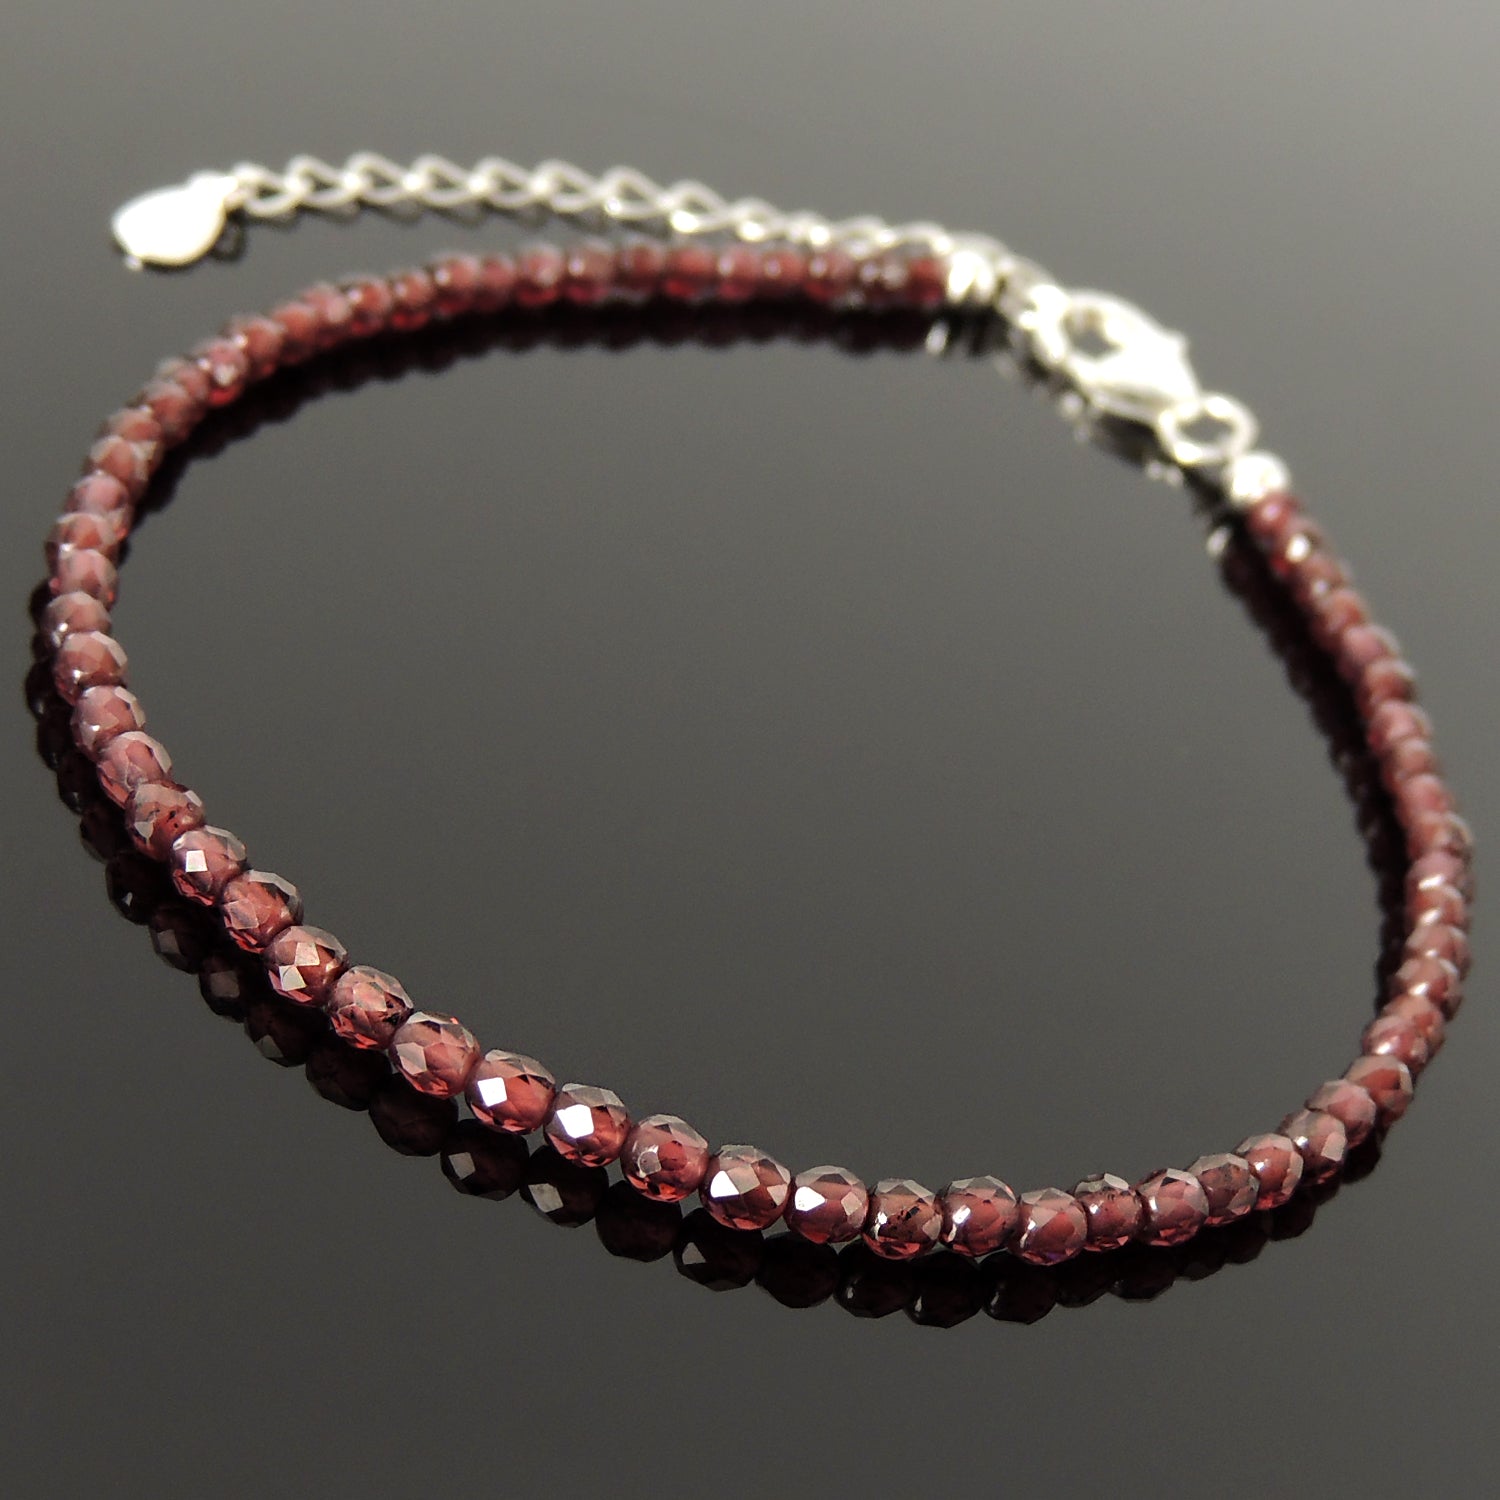 3mm Faceted Garnet Anklet Healing Crystal Bracelet with S925 Sterling Silver Chain & Clasp for Daily Wear, Awareness, Mindful Meditation AN035